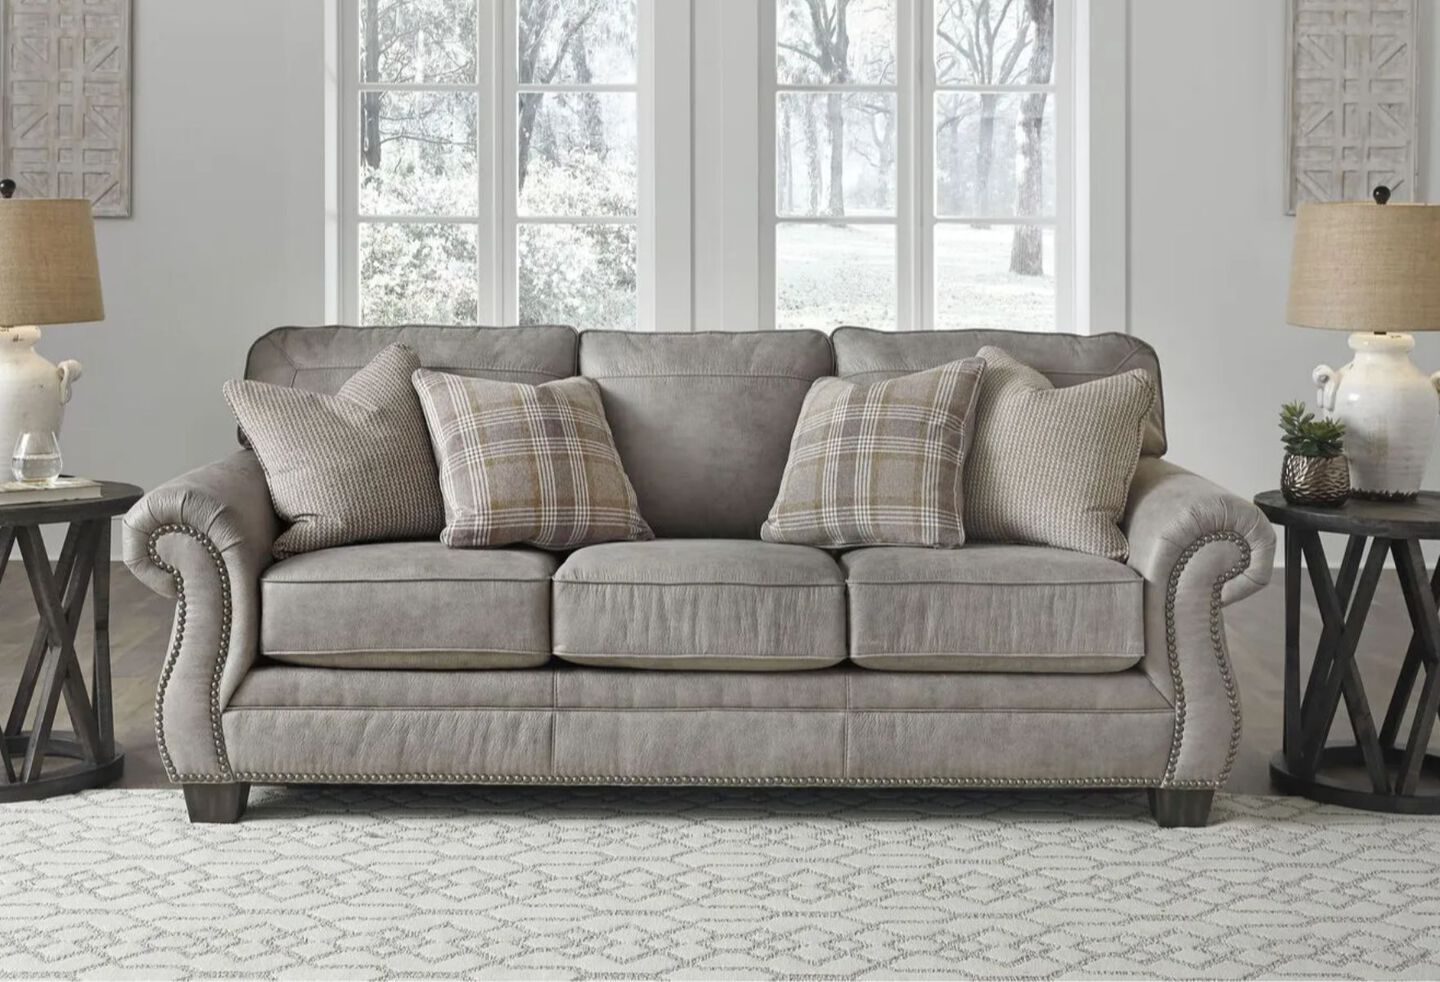 Living room with grey sofa with plaid and grey pillows and two matching side tables